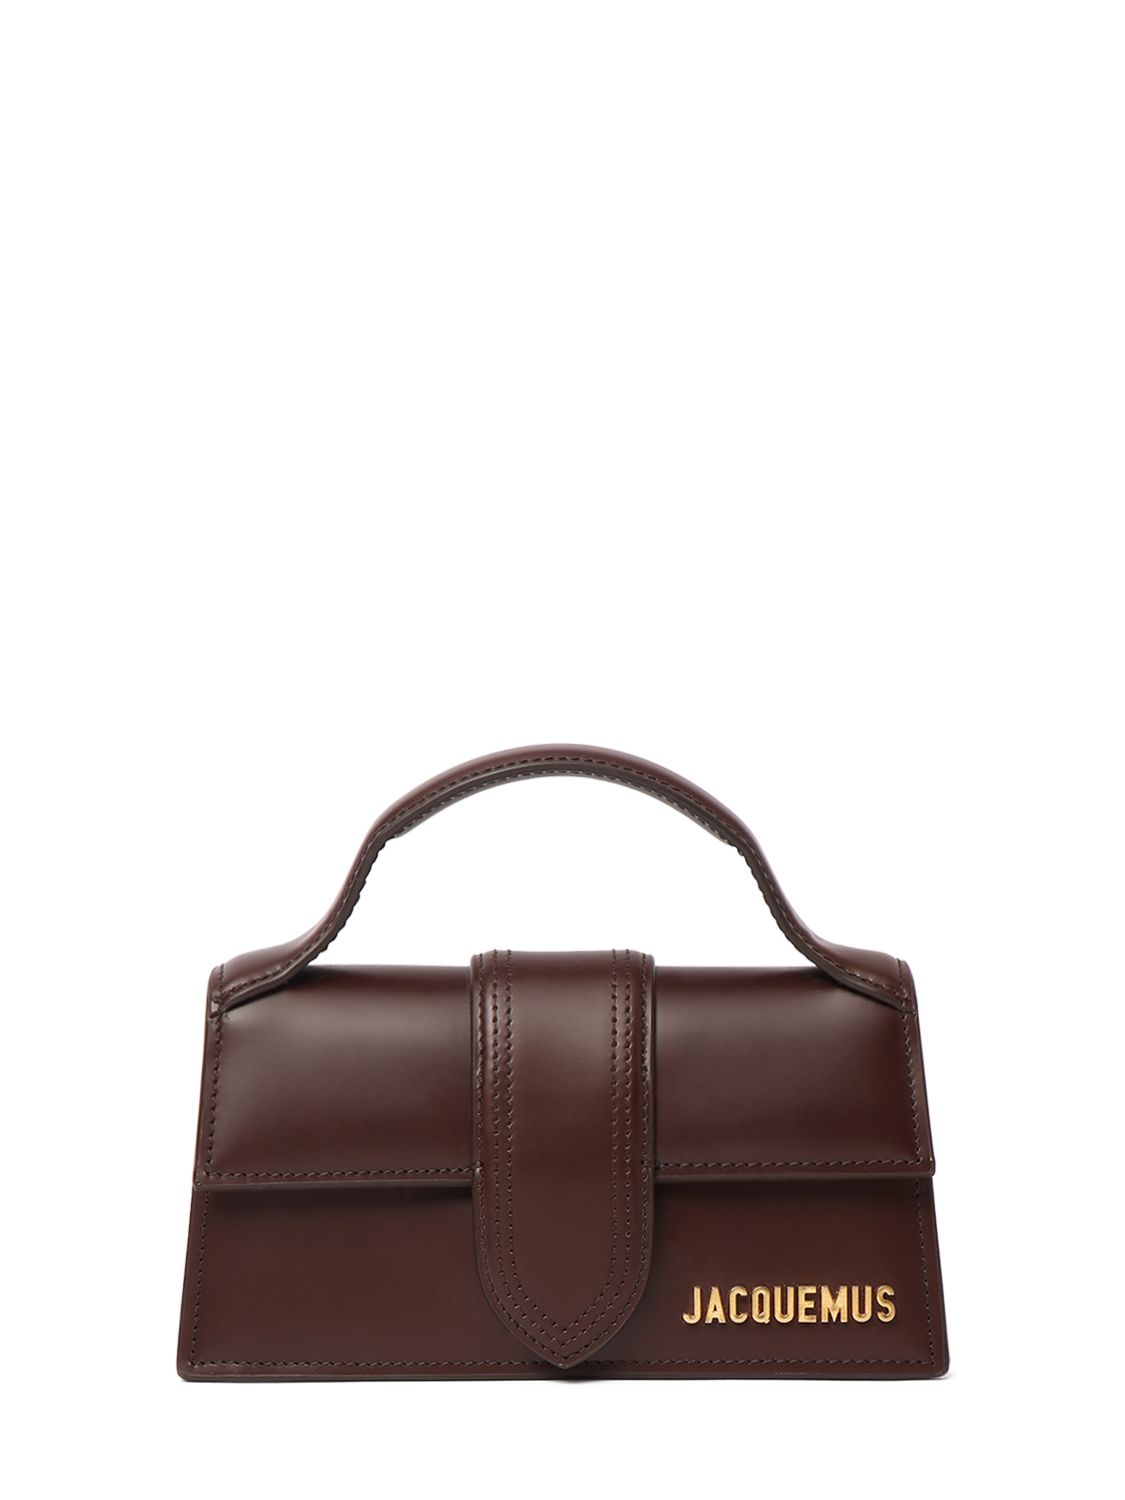 Jacquemus Le Bambino Leather Bag In Brown